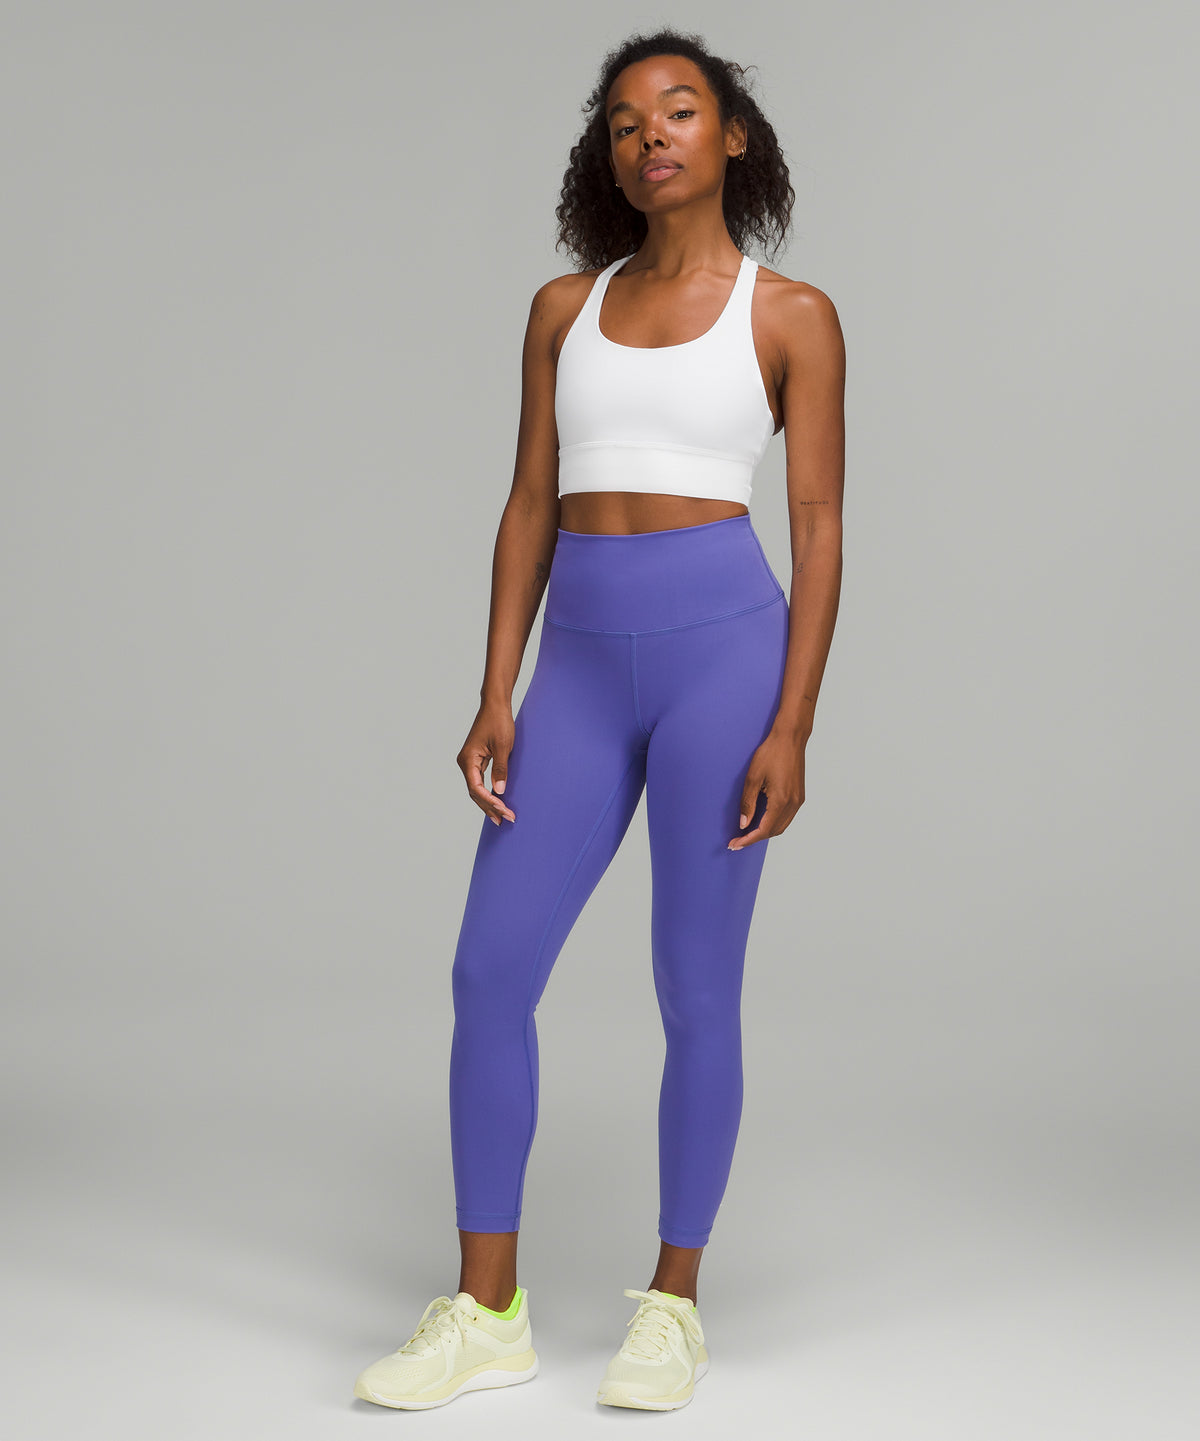 Why the Energy Bra is My Favorite of All Lululemon Sports Bras